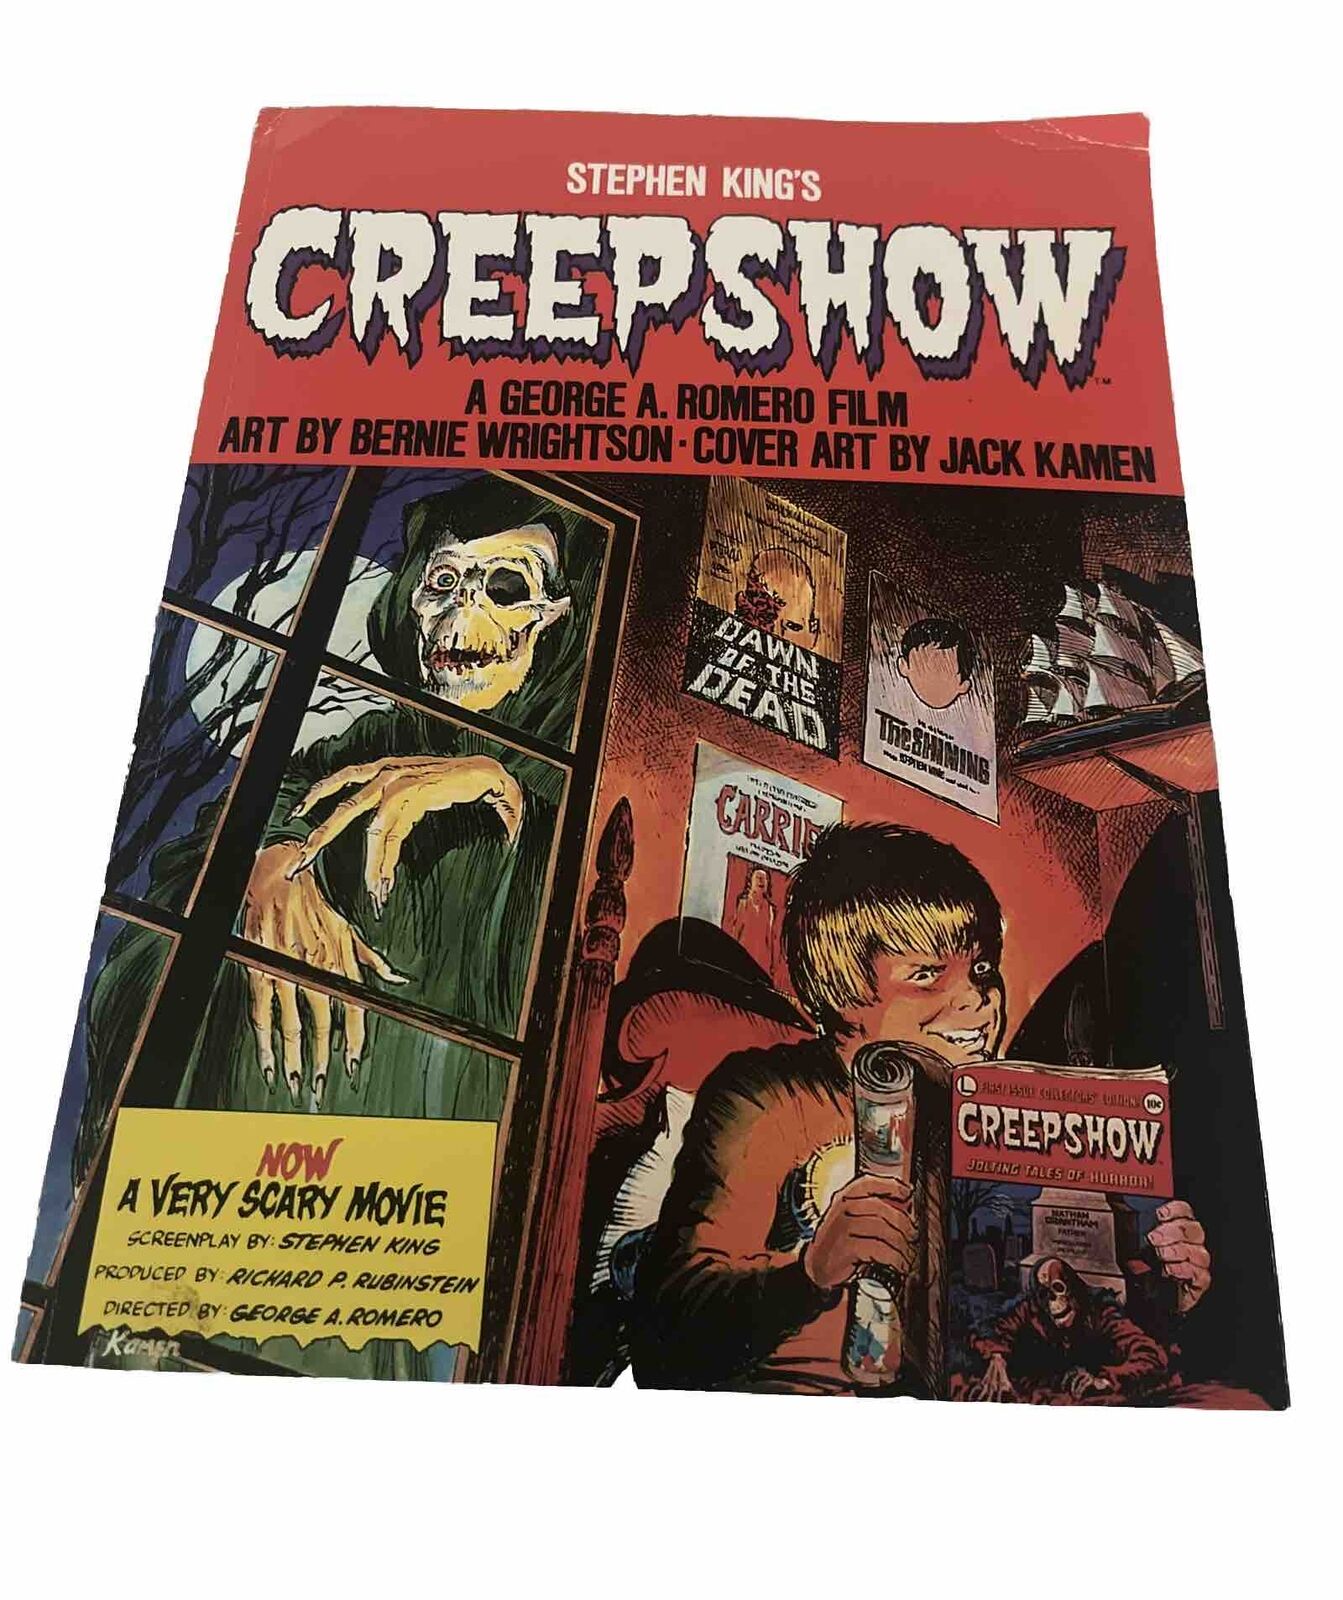 CREEPSHOW by Stephen King (English) Paperback Book 2017 1st Gallery 13 Printing